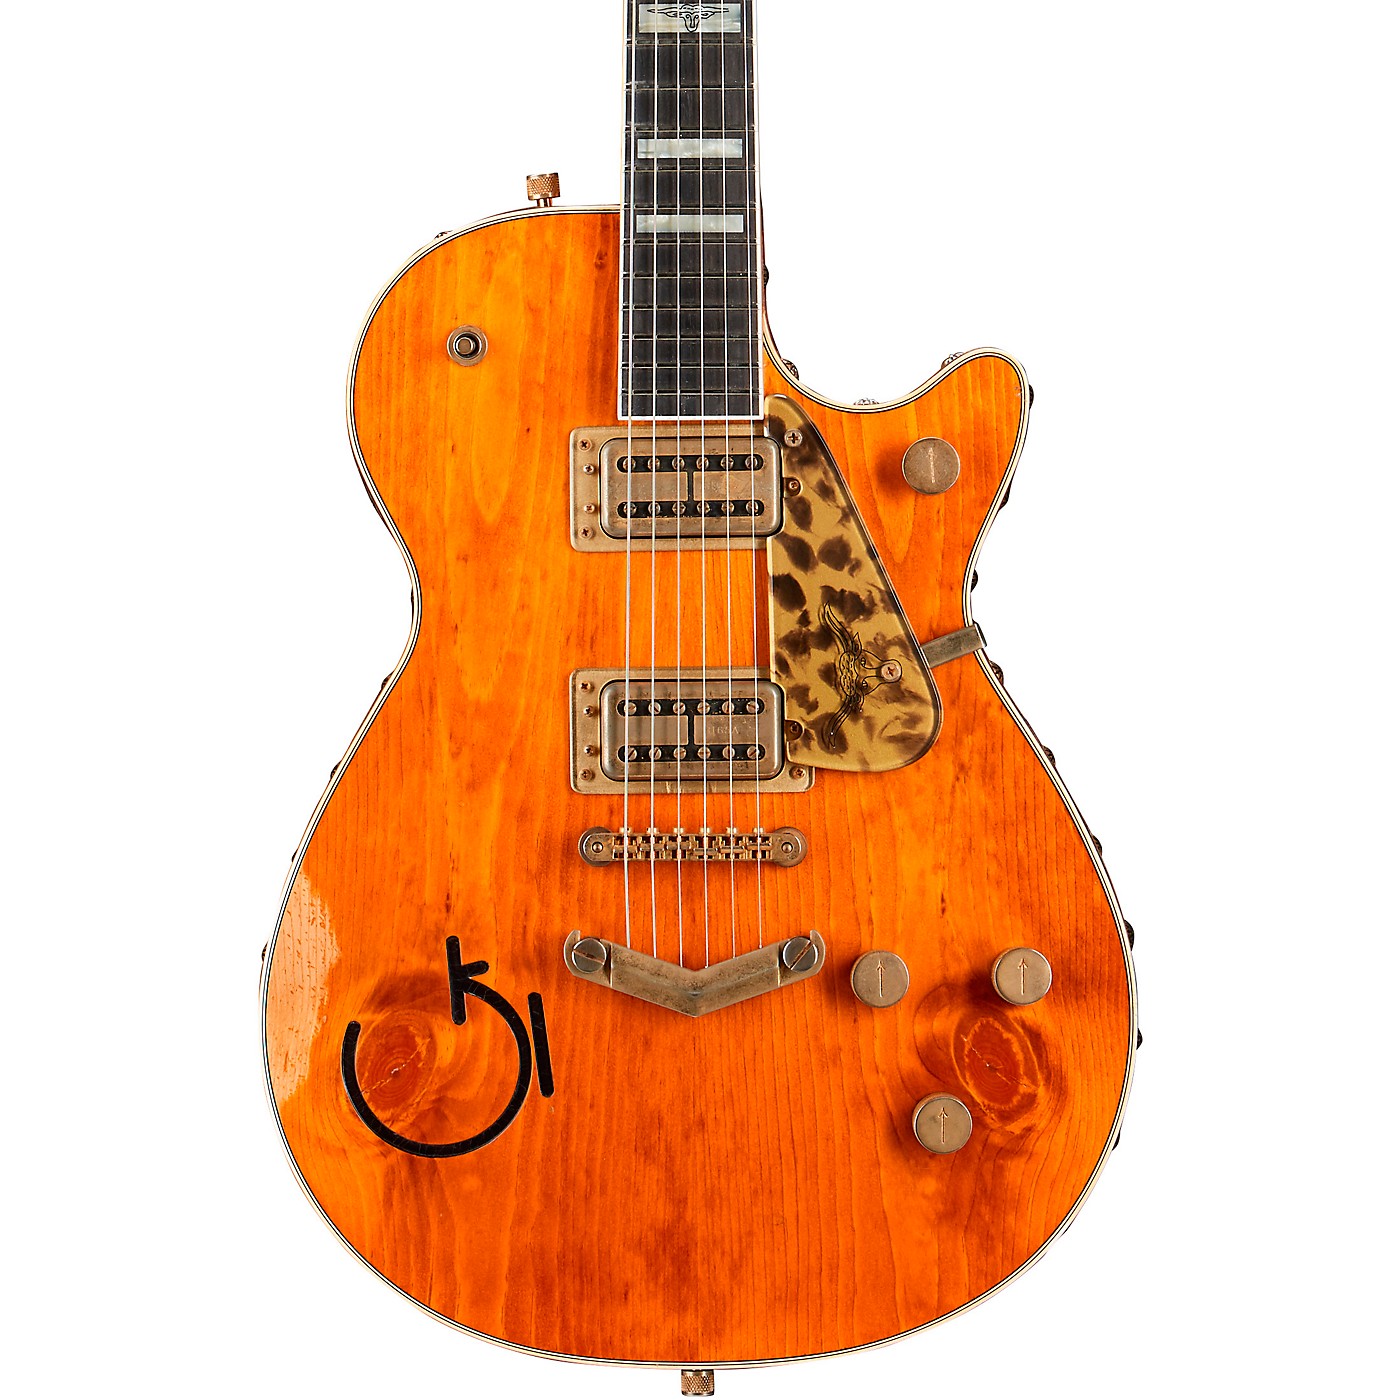 Gretsch Custom Shop G6228 Knotty Pine Round Up Heavy Relic Electric Guitar Masterbuilt By Chad Henrichsen thumbnail